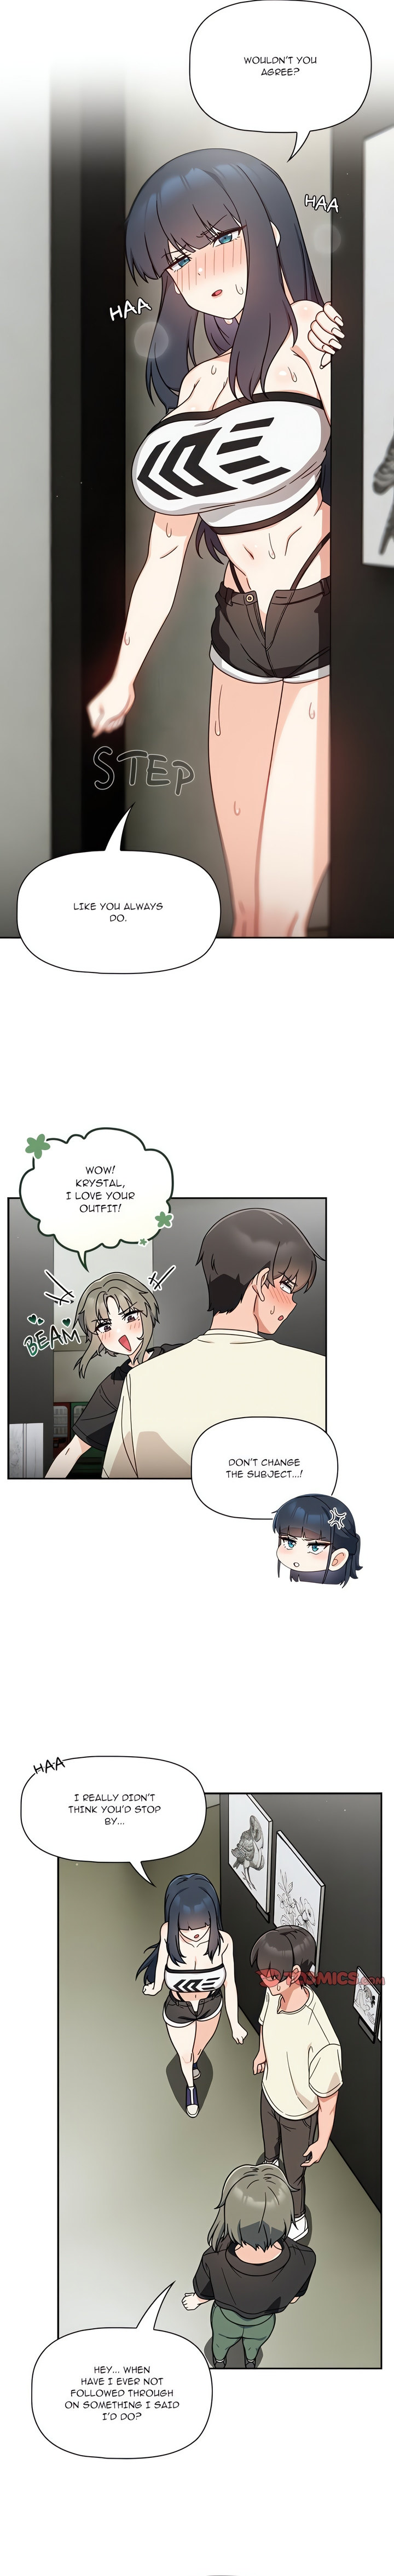 #Follow Me - Chapter 32 Page 4